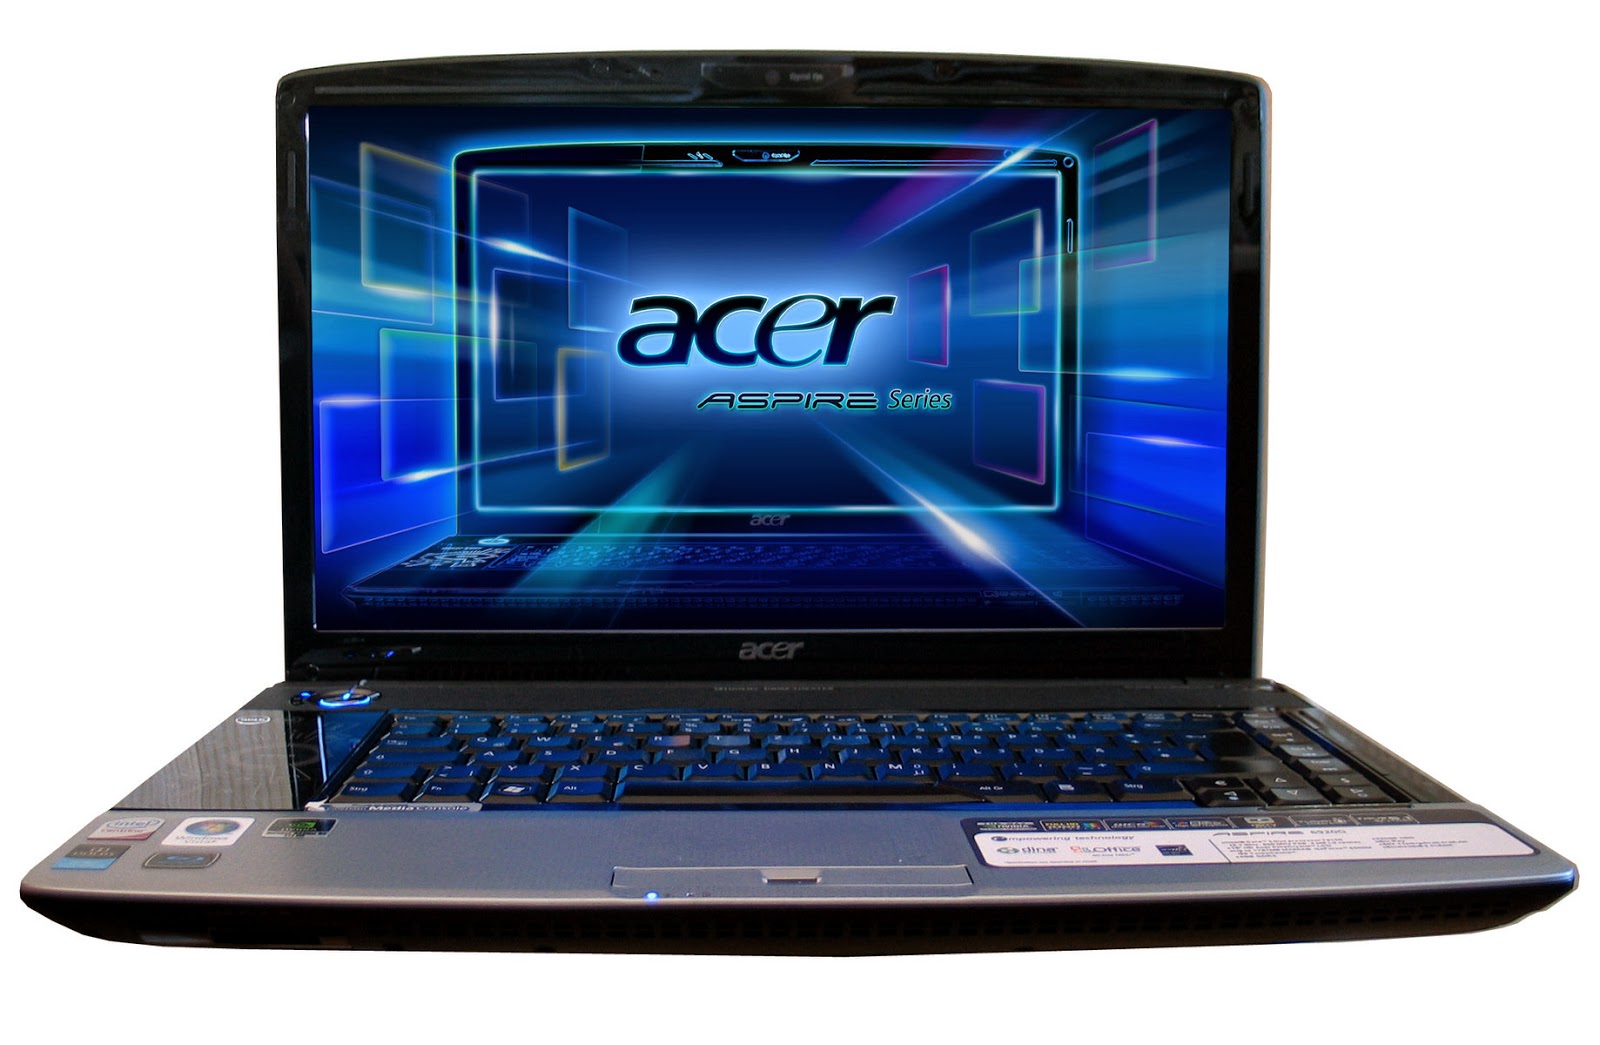 acer aspire one d255e drivers free download for windows 7